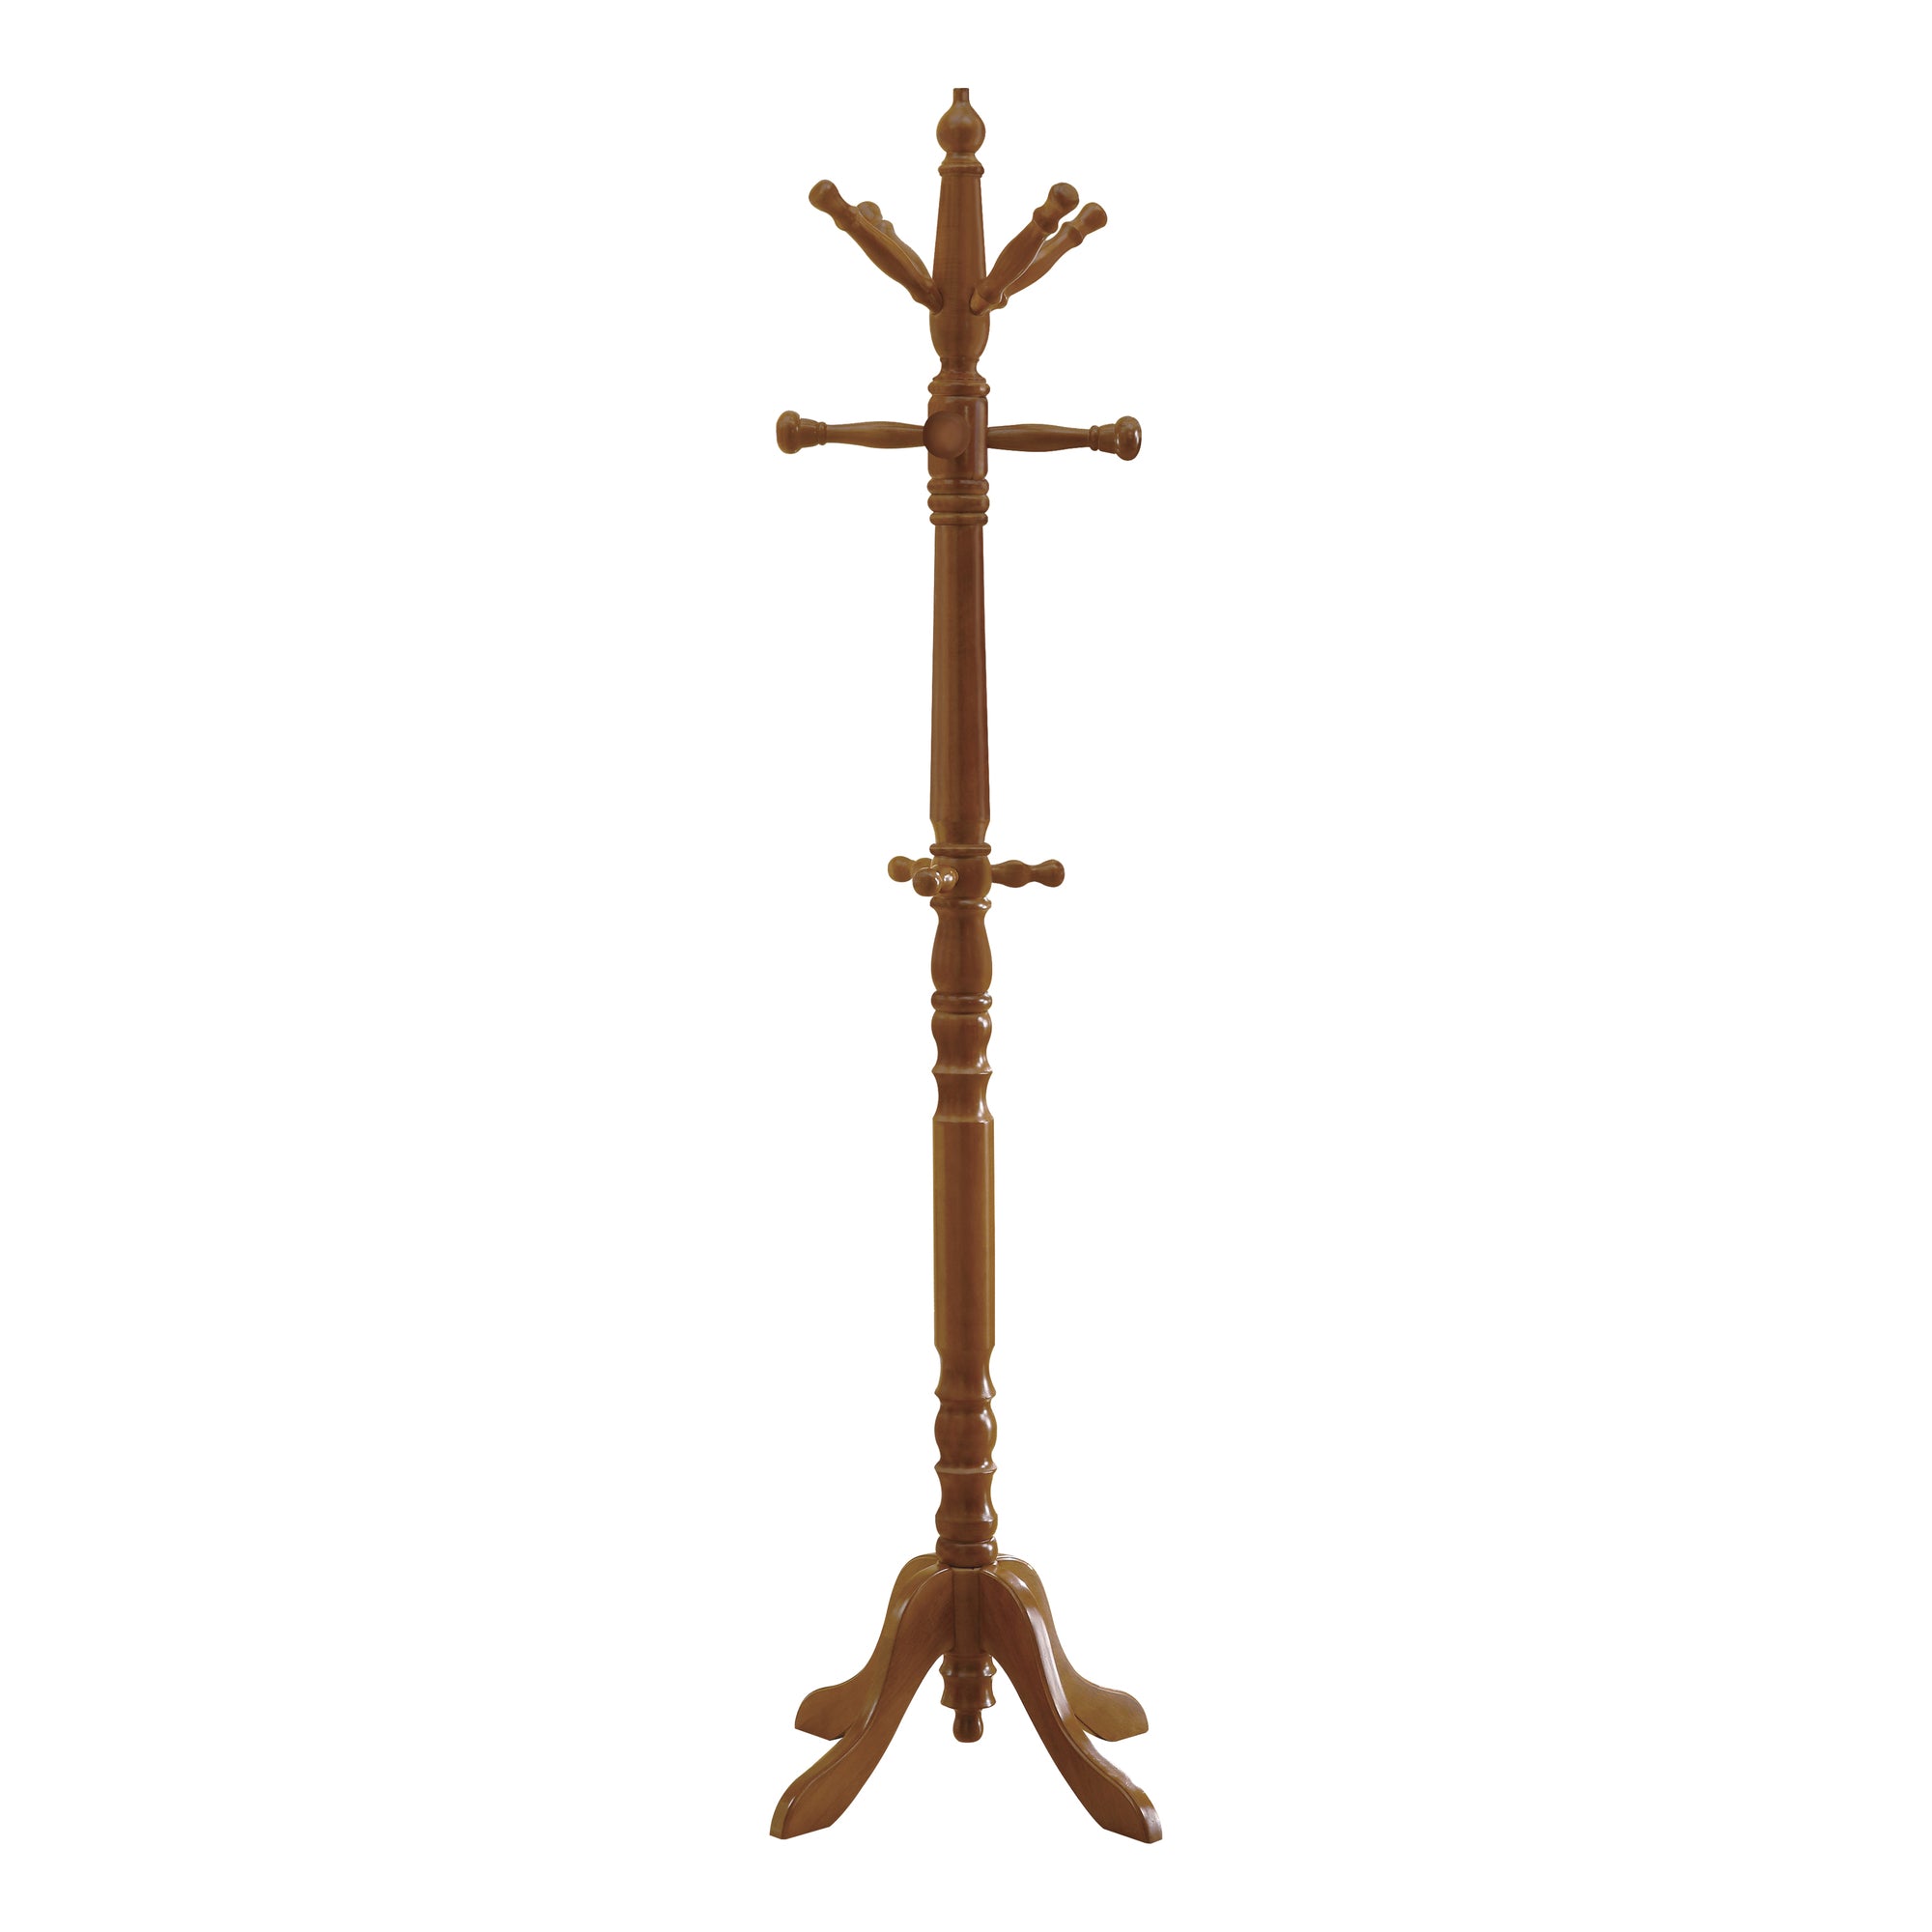 MN-532012    Coat Rack, Hall Tree, Free Standing, 11 Hooks, Entryway, 73"H, Wooden, Brown, Traditional